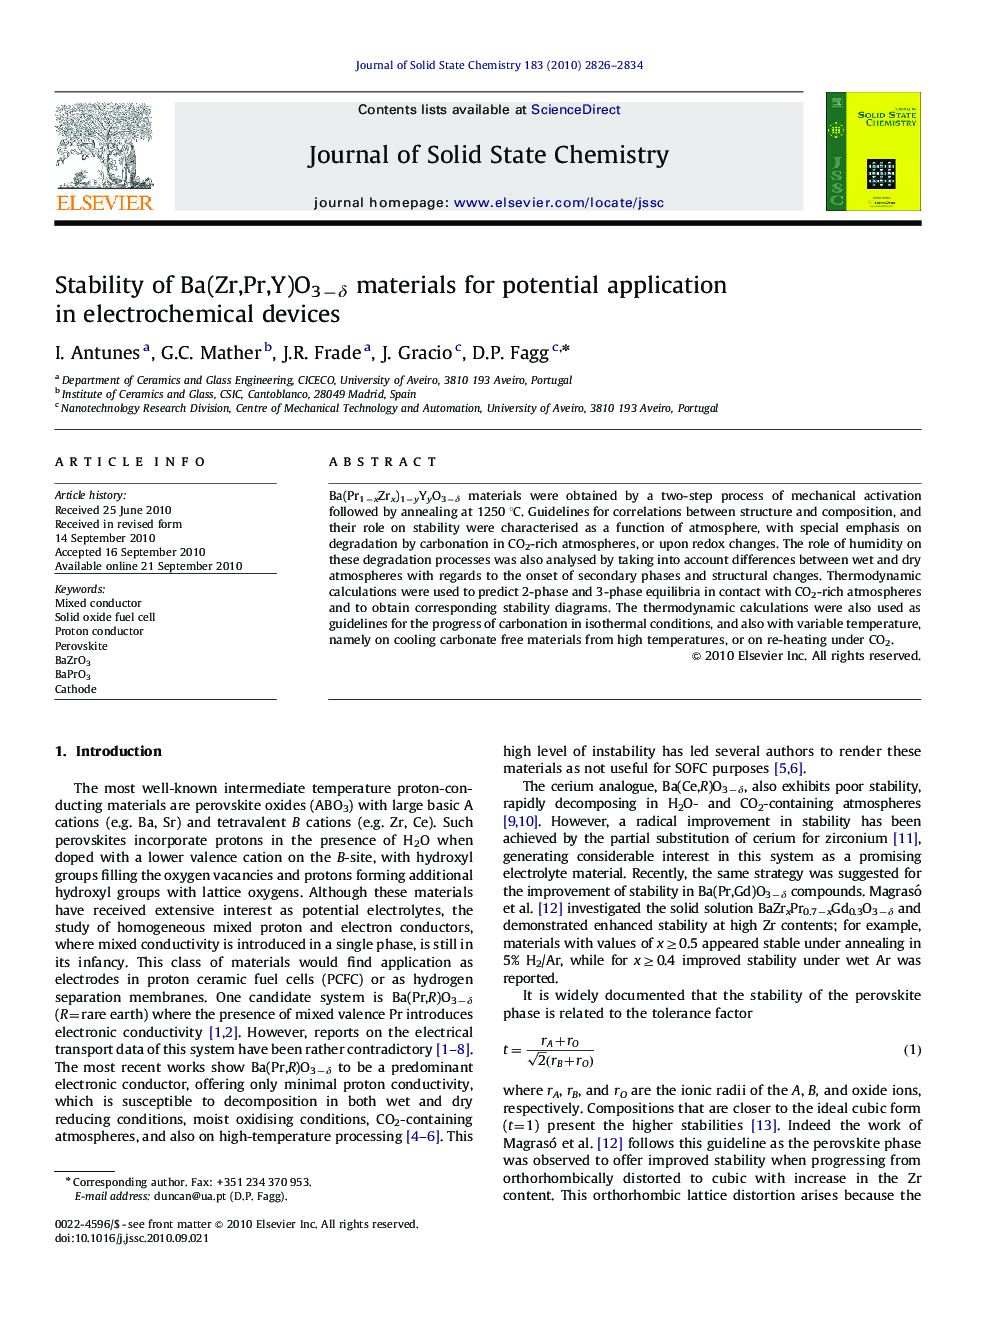 Stability of Ba(Zr,Pr,Y)O3−δ materials for potential application in electrochemical devices